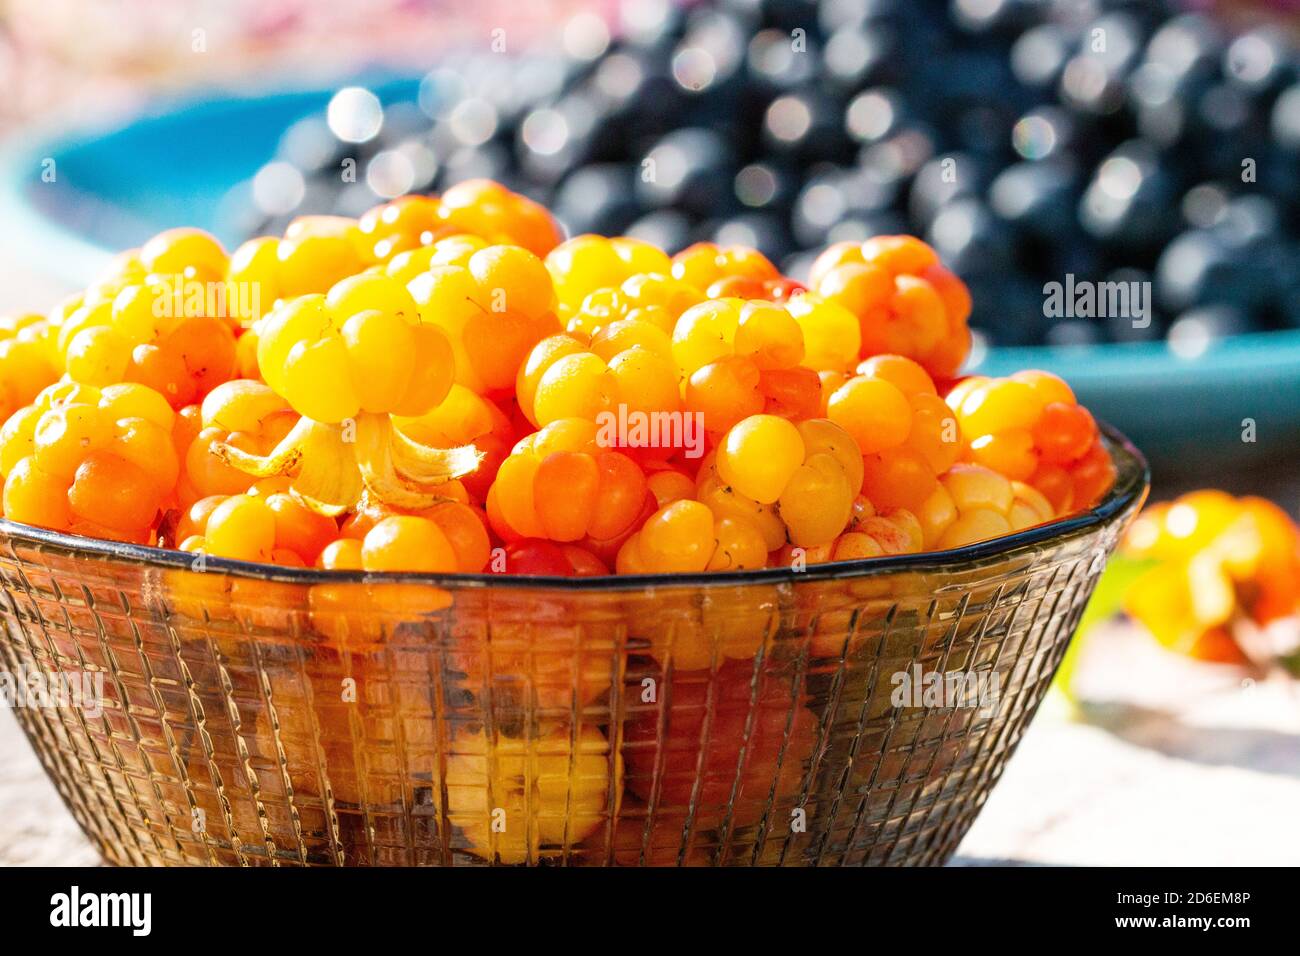 Golden and freshly picked sweet Cloudberries (Rubus chamaemorus) as northern delicacy in a small glass bowl during a summer day in Estonia. Stock Photo